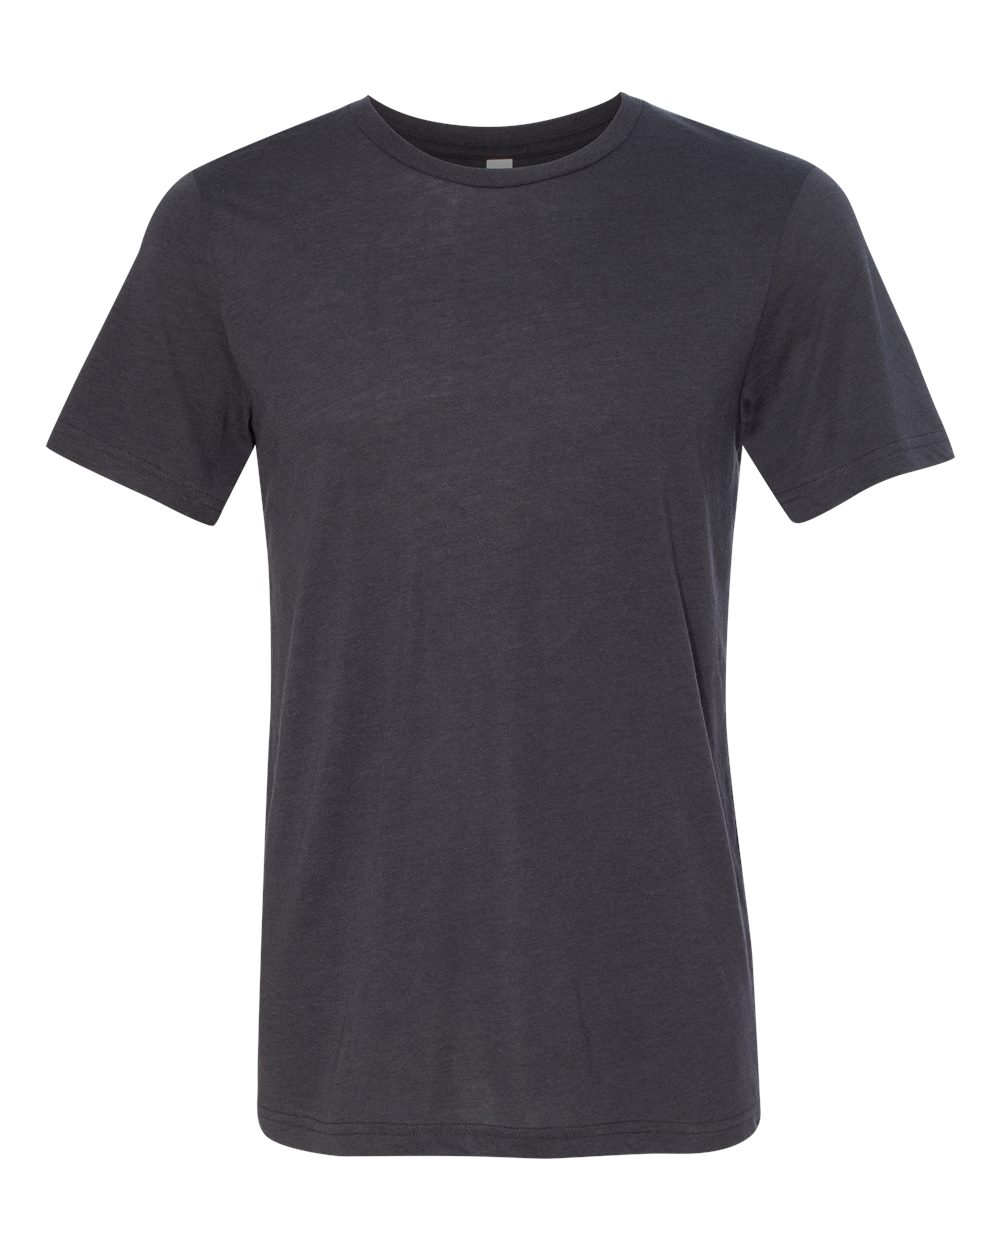 click to view Solid Dark Grey Triblend